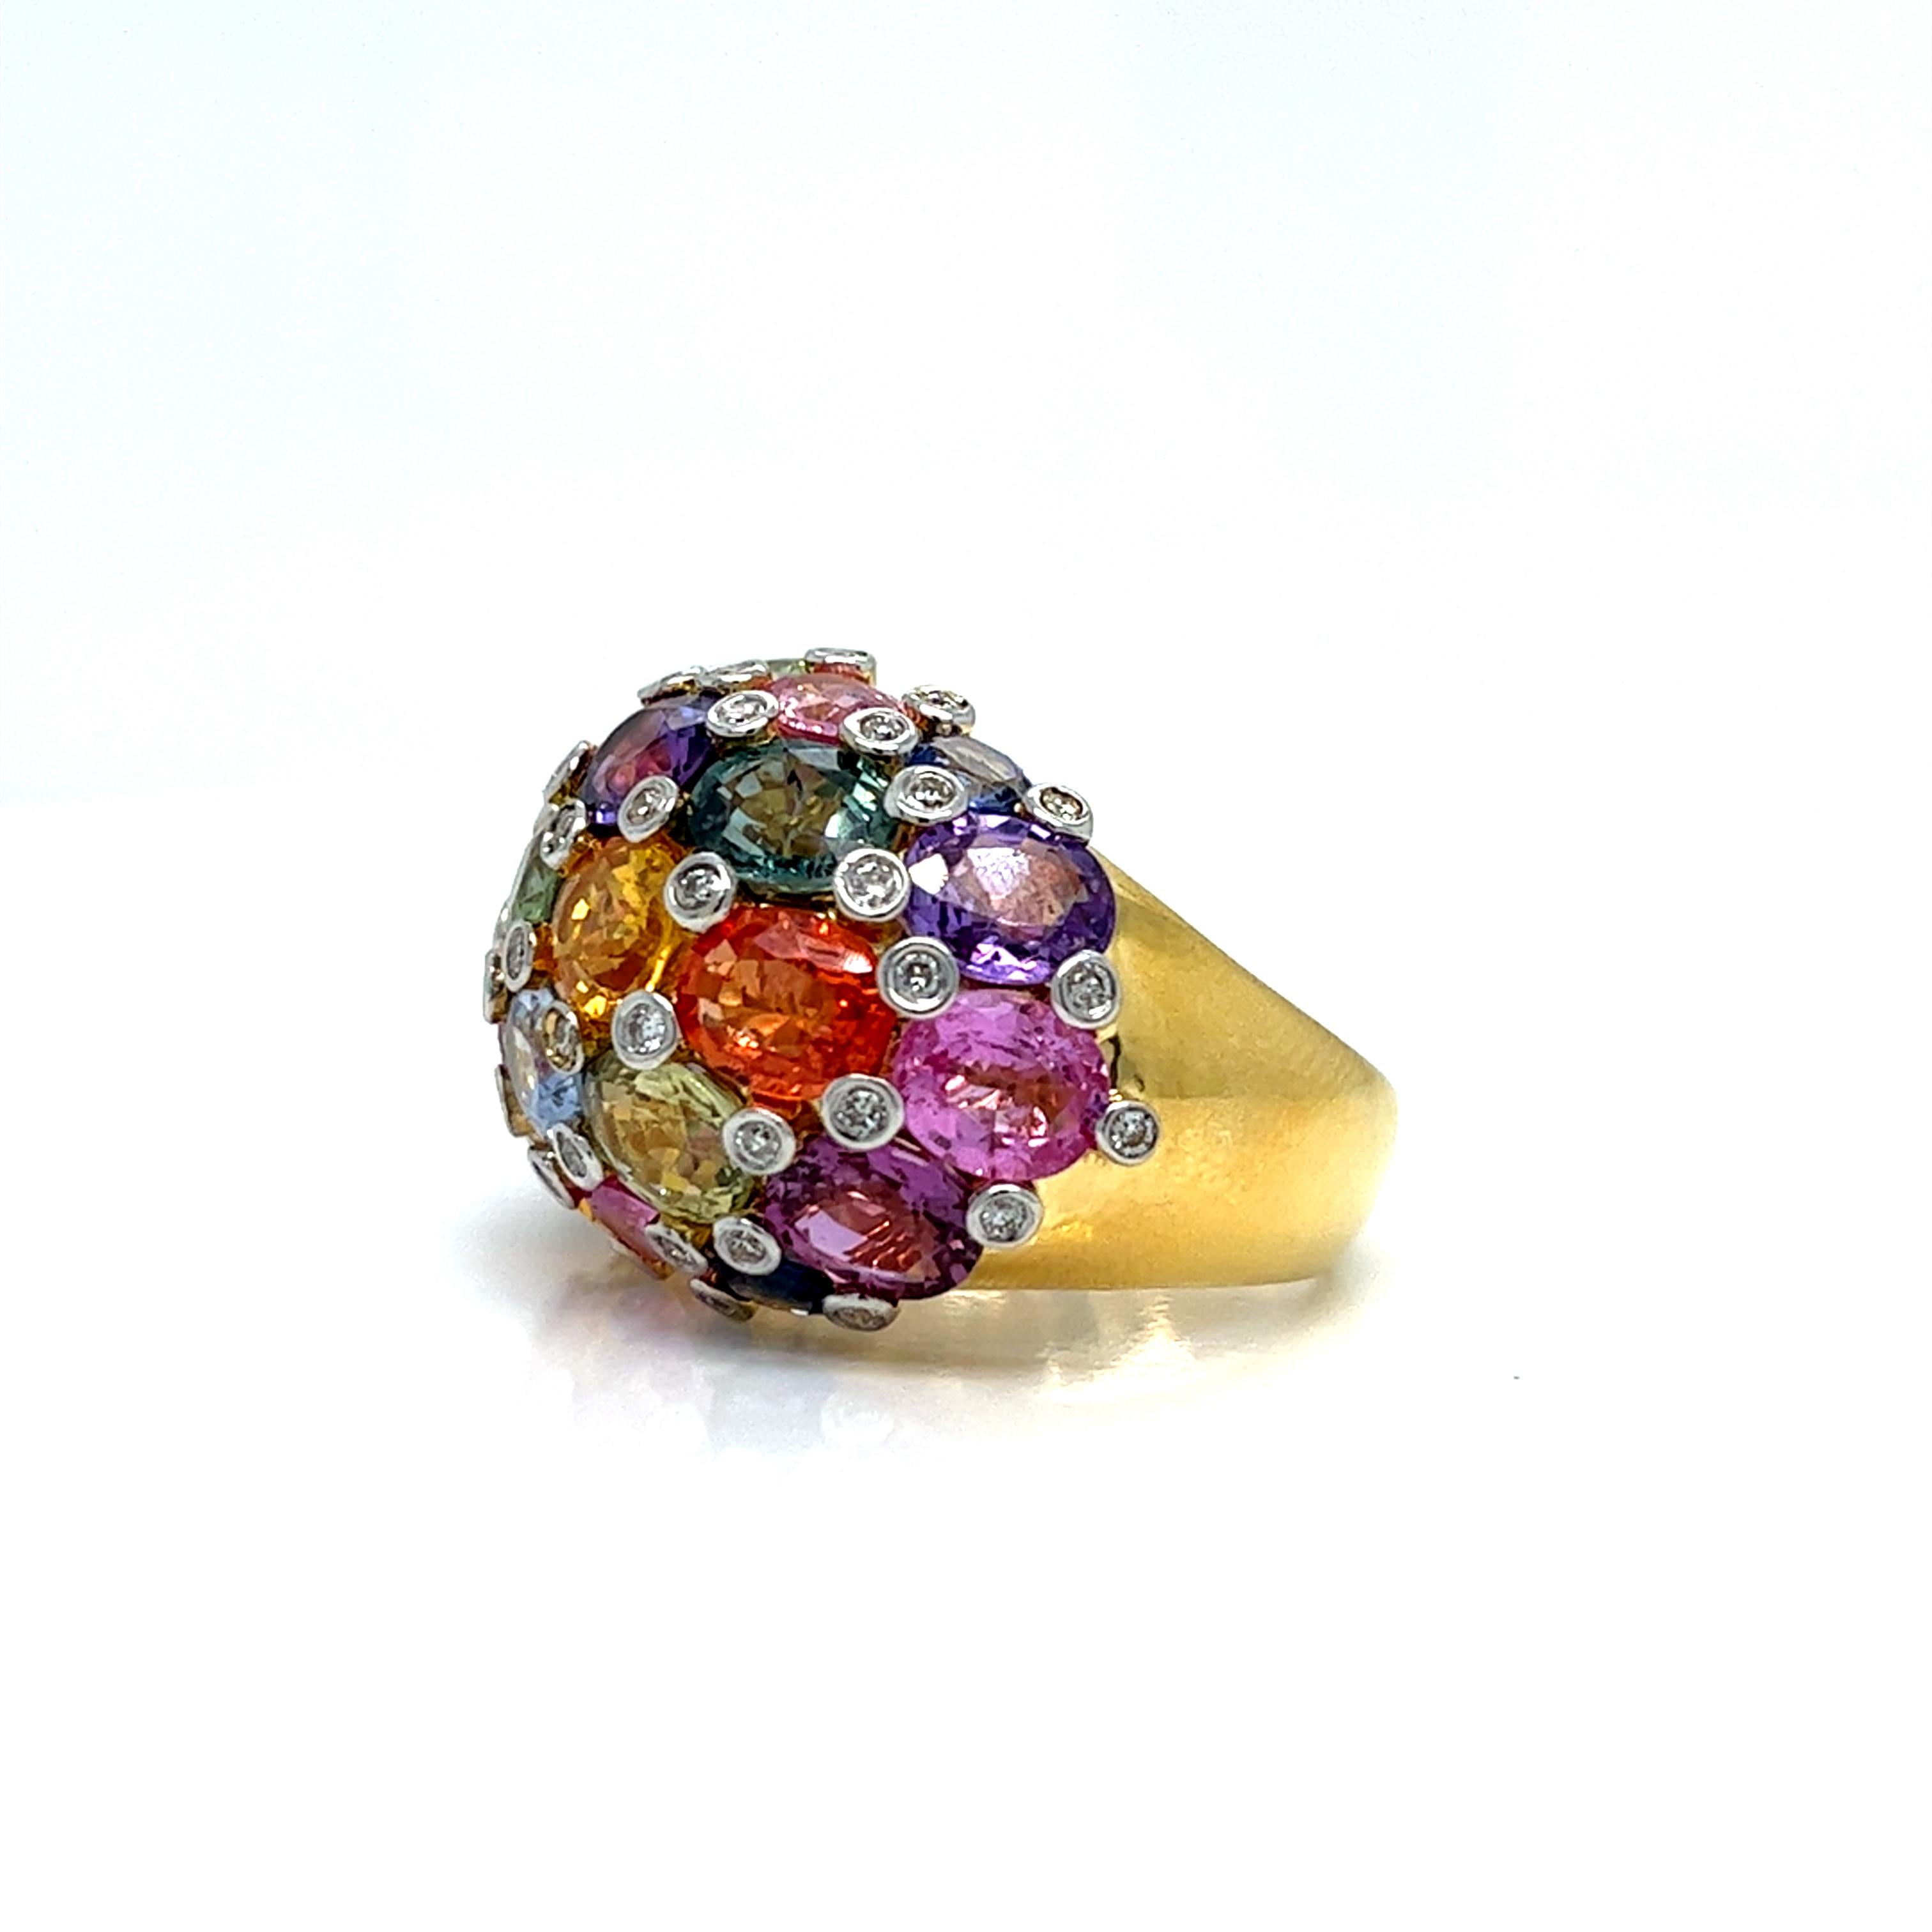 This dome design ring is a luxurious piece crafted in Italy, made from 18kt gold. It's adorned with natural color sapphires and round diamonds, promising and exquisite combination of gemstones set in a captivating design. A true statement of